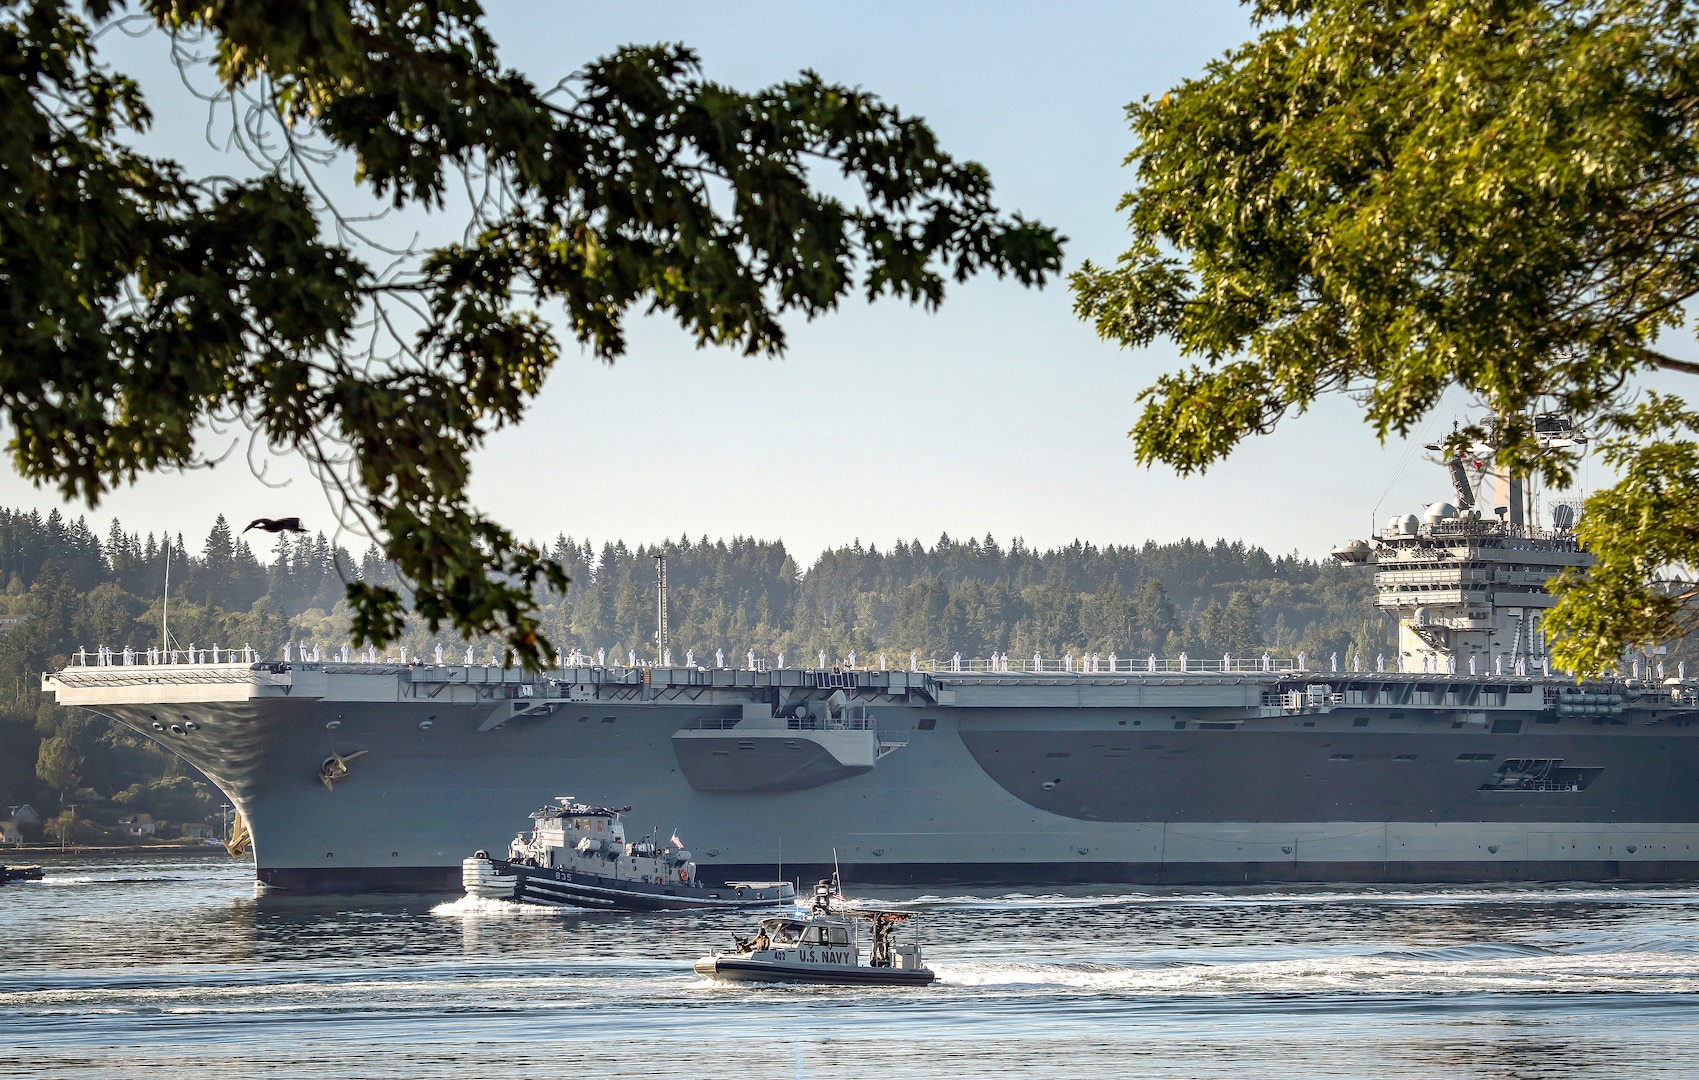 The USS Carl Vinson (CVN 70) makes its way past Point Herron Aug. 23, 2020 after departing Puget Sound Naval Shipyard & Intermediate Maintenance Facility in Bremerton, Washington. PSNS & IMF completed a docking planned incremental availability on Vinson Aug. 27, 2020, as the aircraft carrier completed sea trials enroute to San Diego, where it was homeported prior to its arrival at Naval Base Kitsap-Bremerton, Jan. 20, 2019.(PSNS & IMF photo by Scott Hansen)